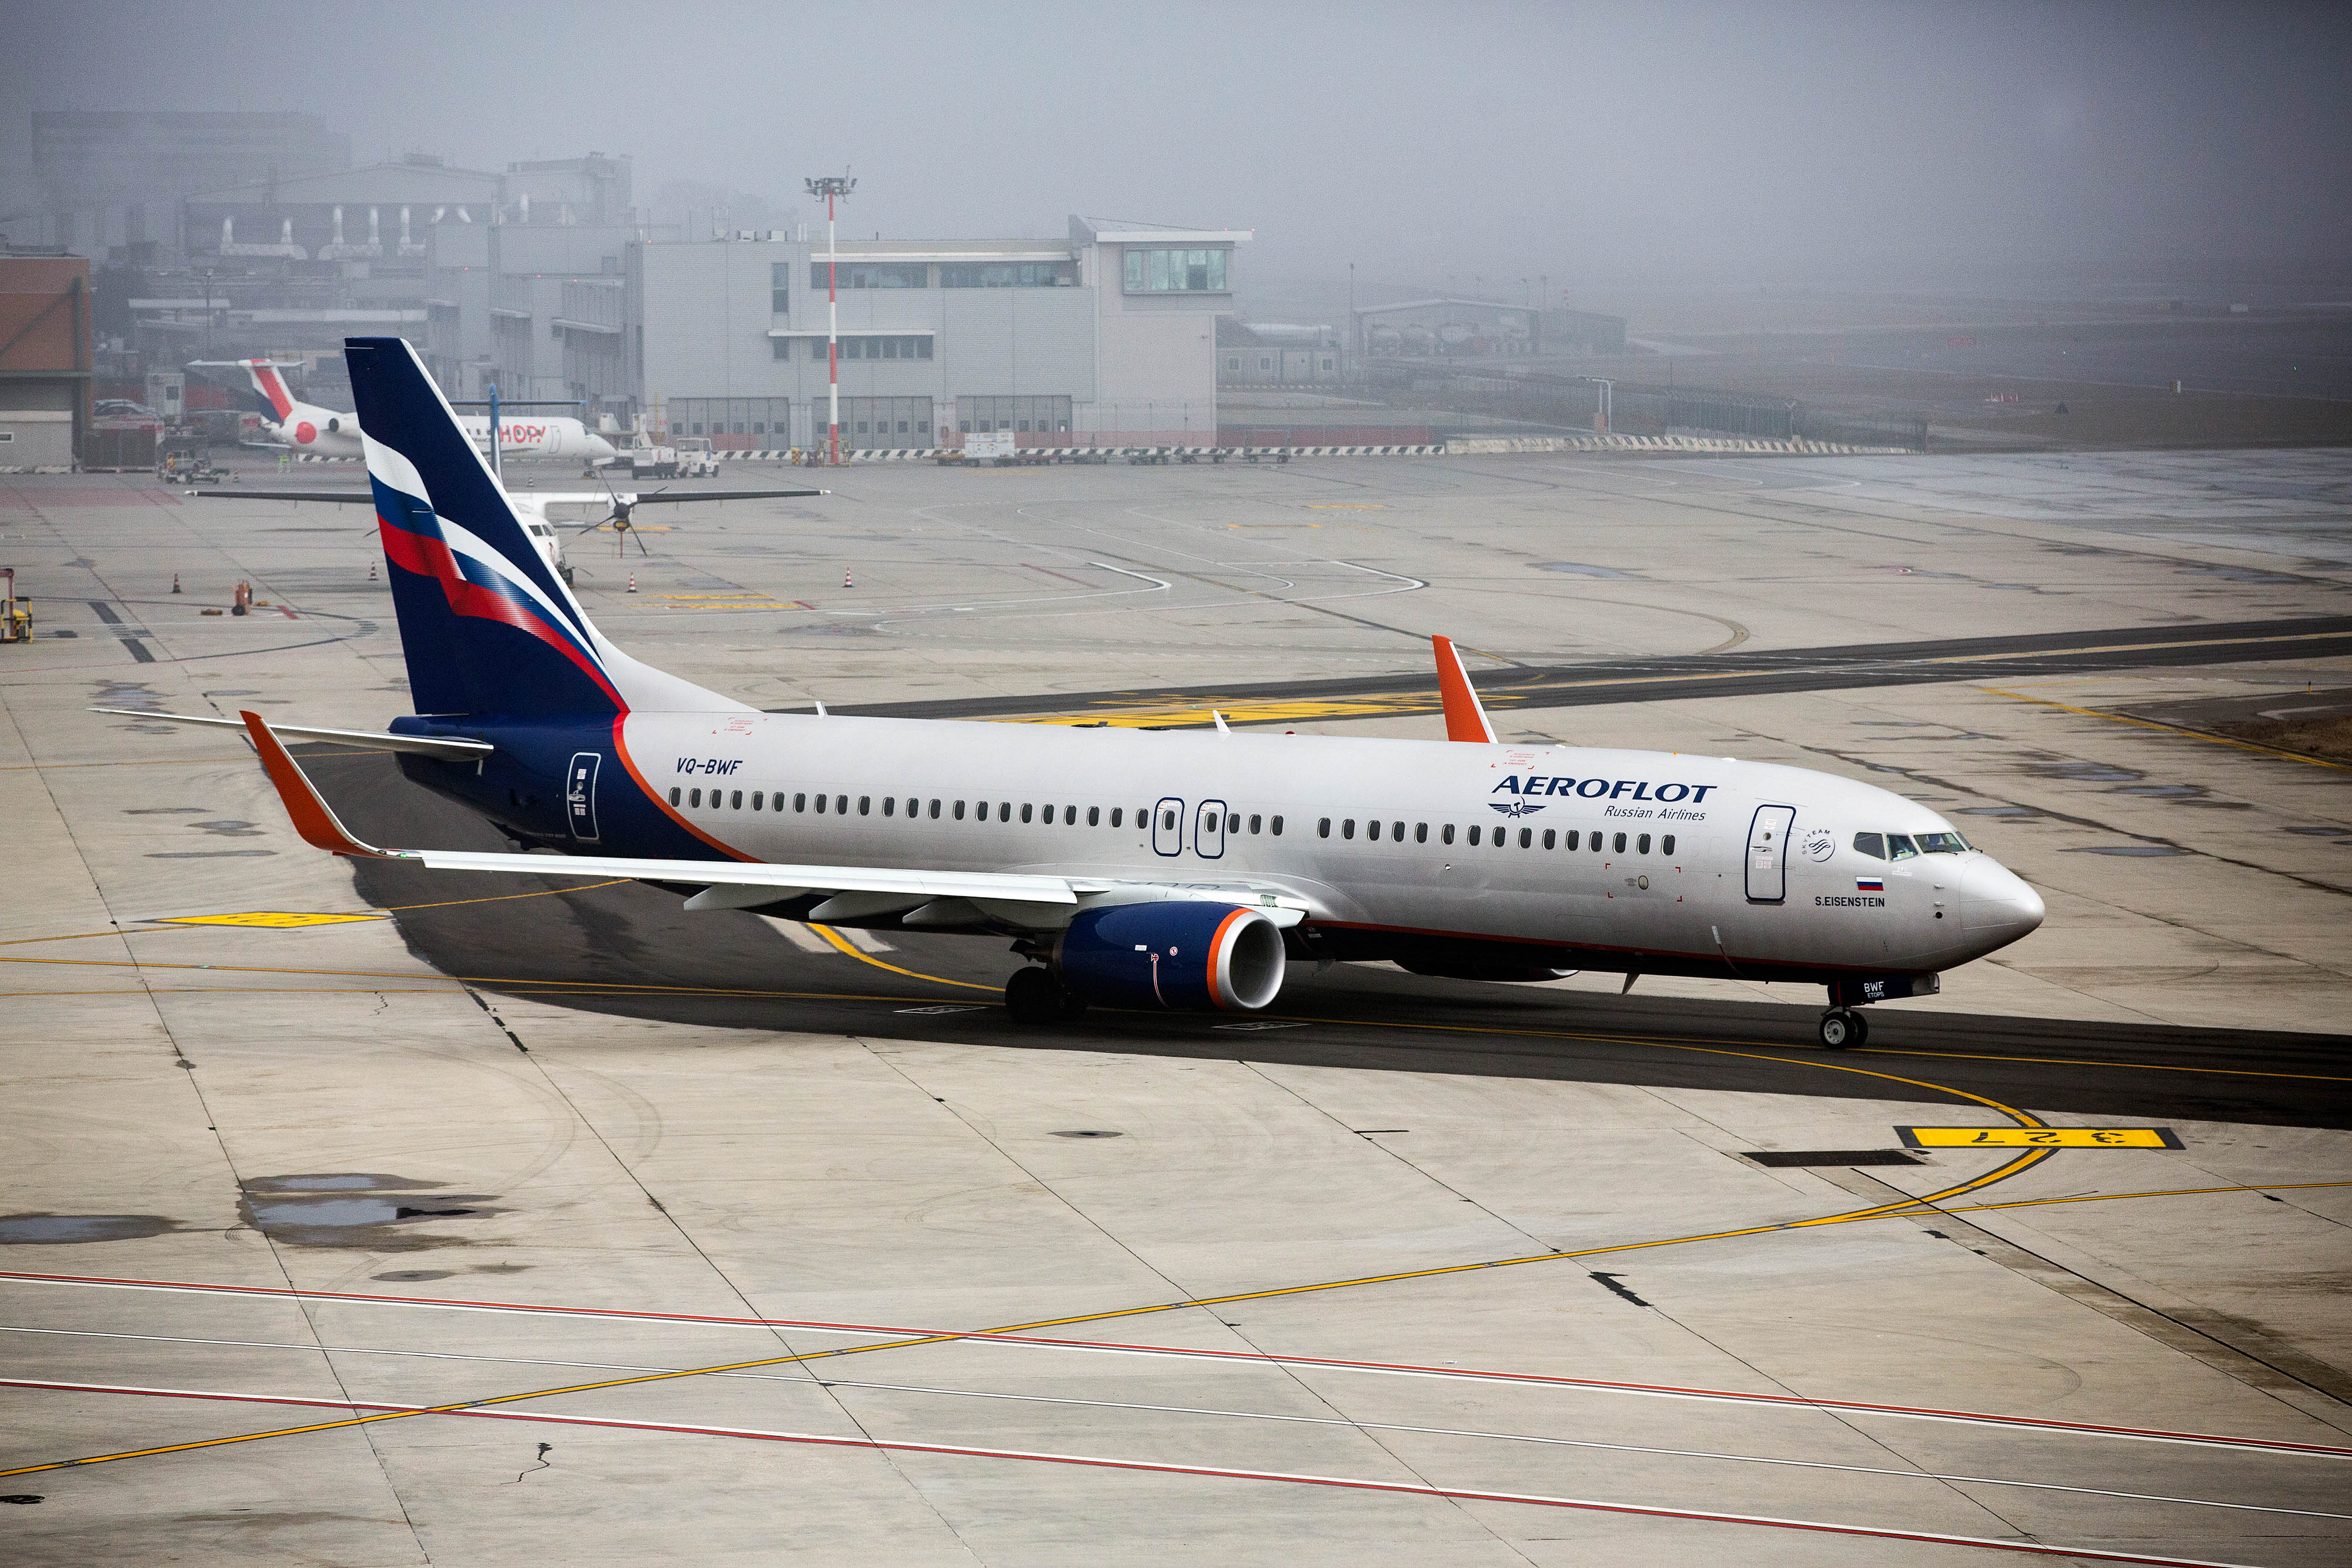 A Boeing Co 787 passenger aircraft, operated by Aeroflot - Russian Airlines PJSC, taxis on the tarmac at Venice Marco Polo Airport (VCE) in Venice, Italy, on Monday, Feb. 1, 2016. (Alessia—Bloomberg/Getty Images)